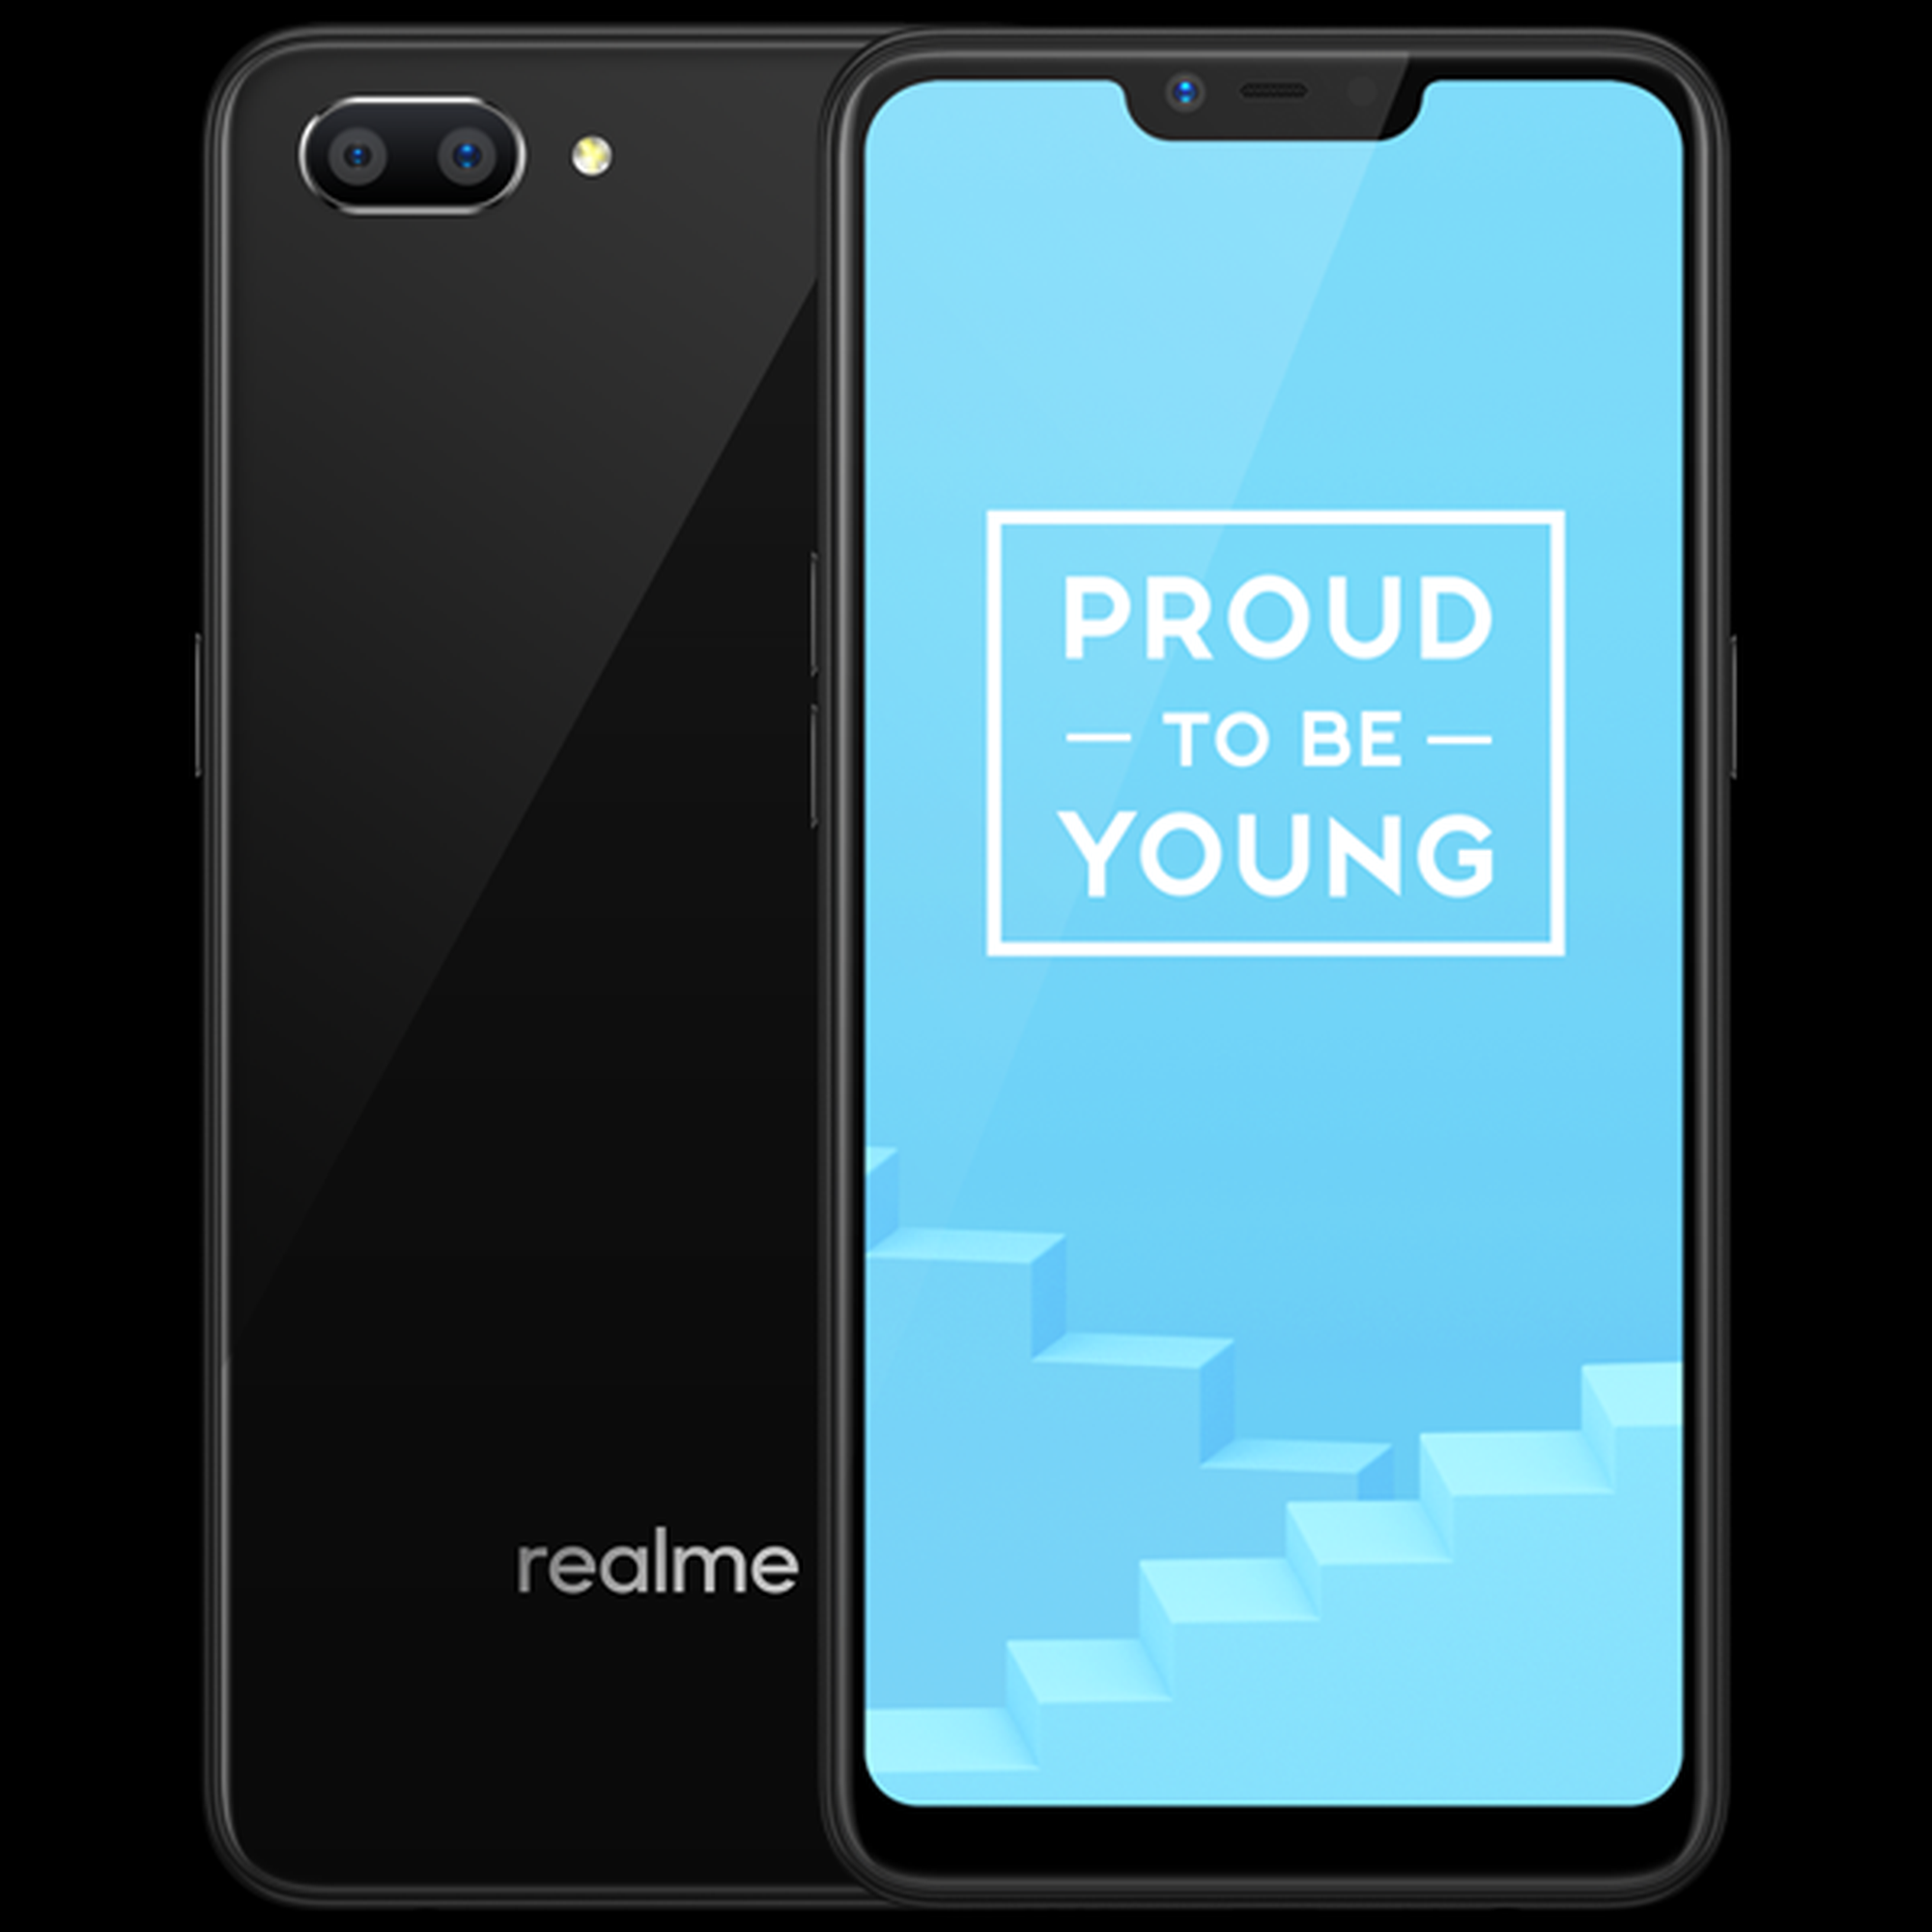 November security update now available for Realme 2 and Realme C1